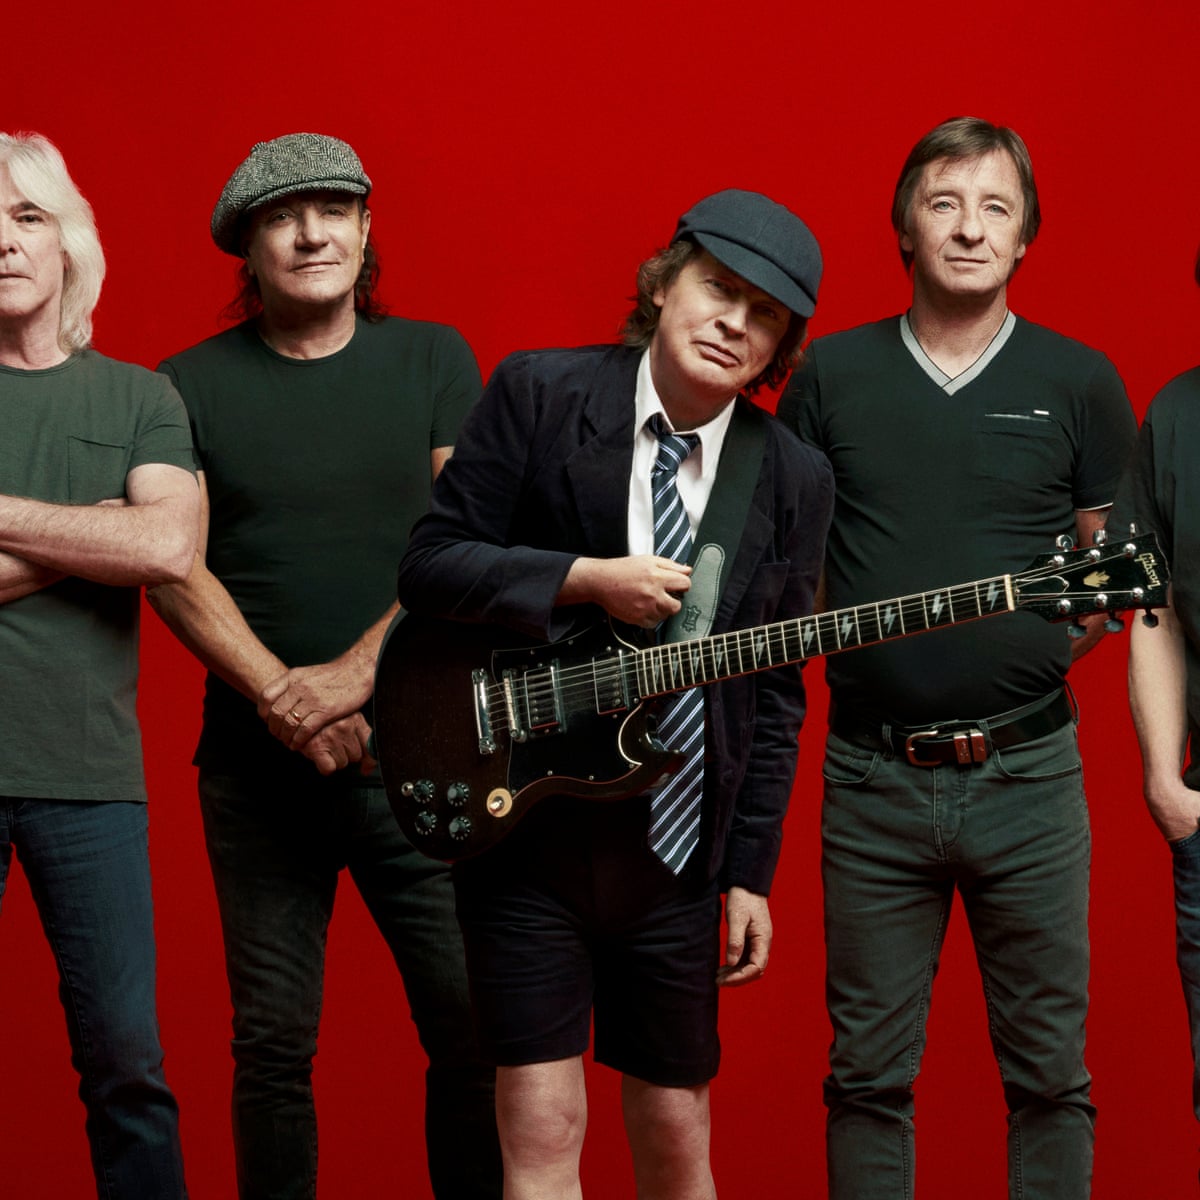 impossible return of AC/DC: 'You could electricity in the air' | | The Guardian